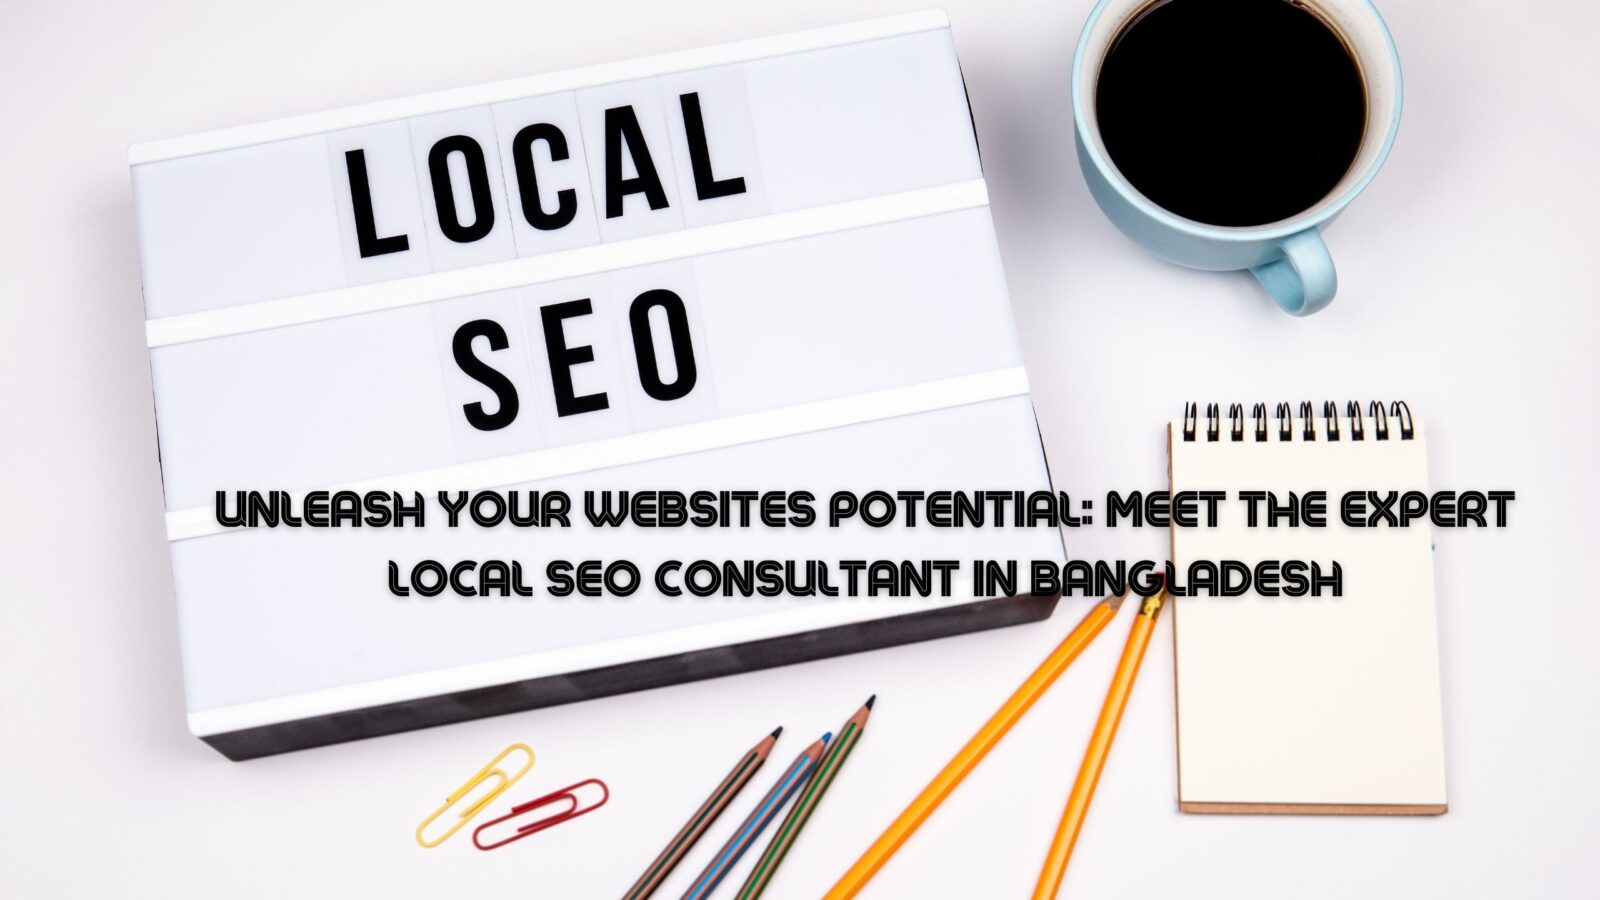 Unleash Your Websites Potential: Meet the Expert Local SEO Consultant in Bangladesh